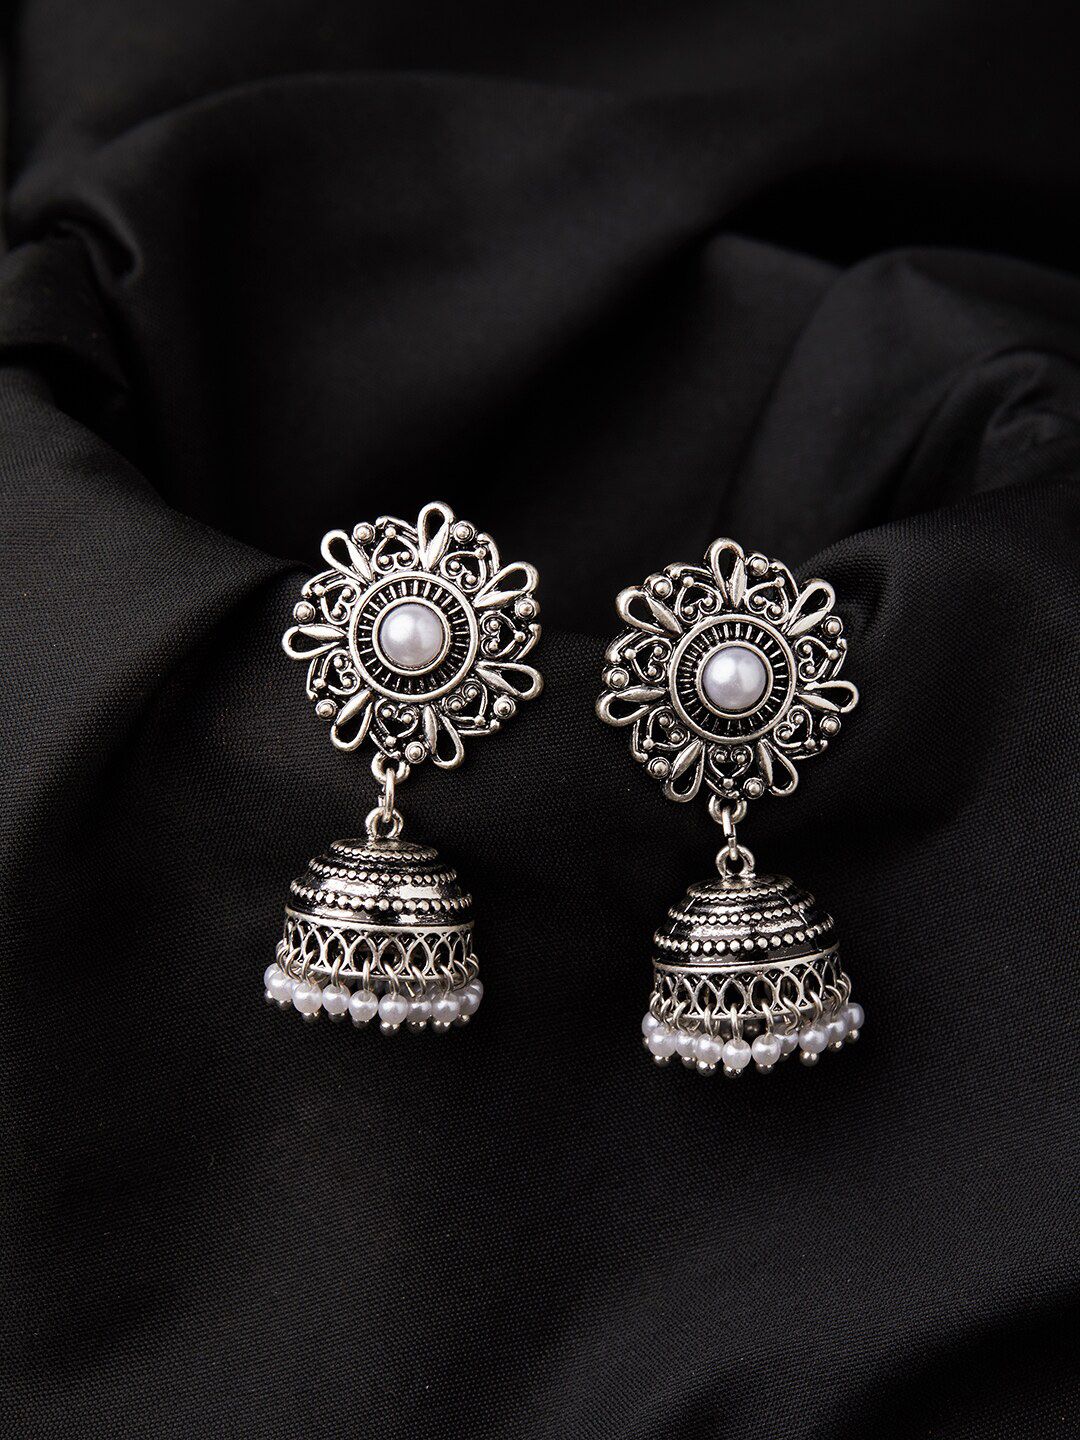 Accessorize Silver Contemporary Jhumkas Earrings Price in India